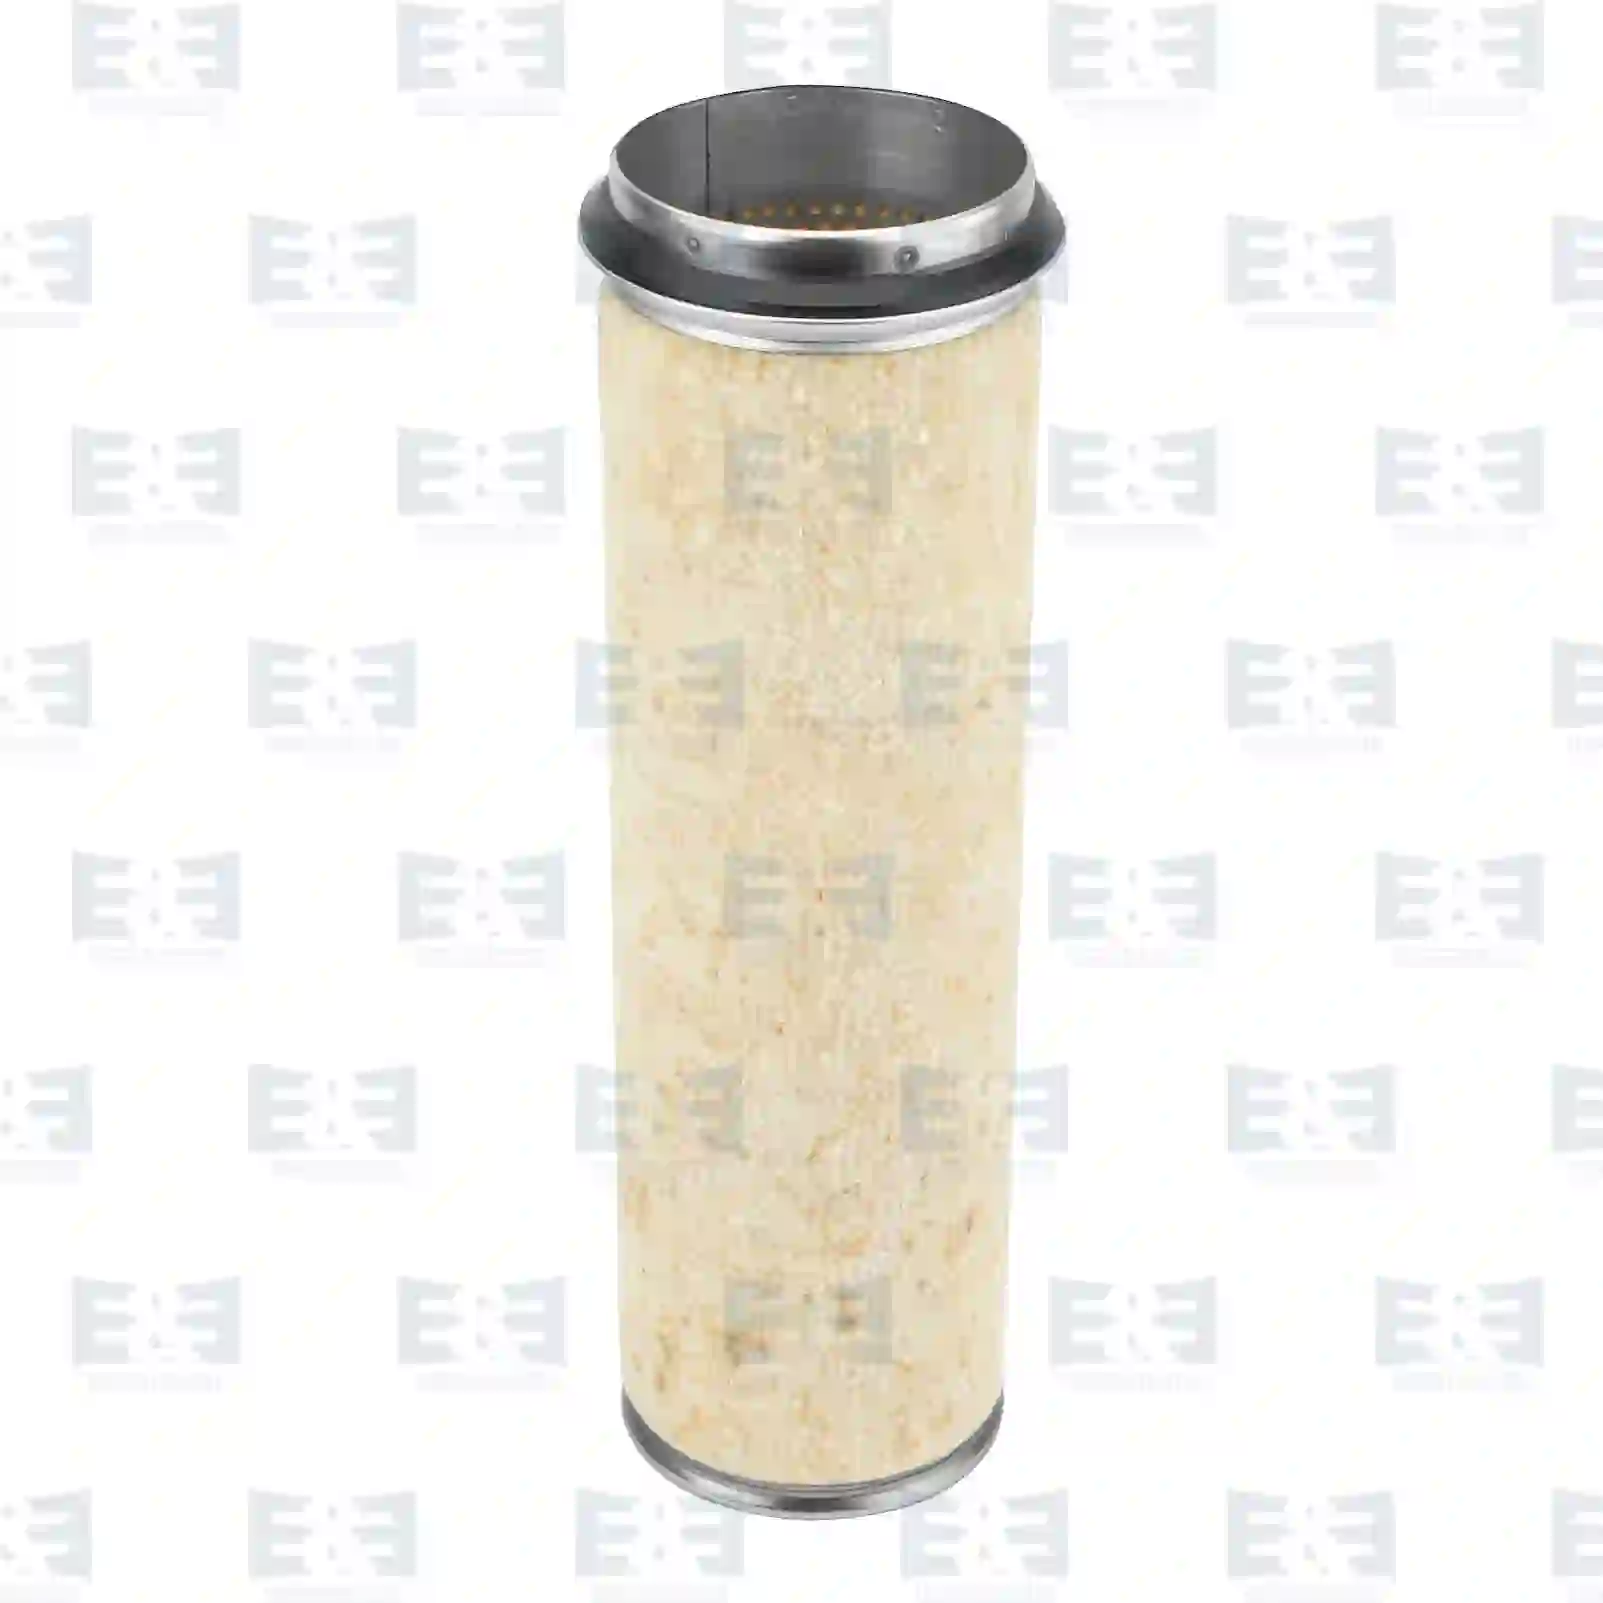  Air Filter Air filter, inner, EE No 2E2204855 ,  oem no:F280200090030, 2009101129008, 8009101129008, 430288, 80430288, 0006575640, 0006575641, 988767, 98876700, 00224393, 02243946, 04280759, 1210702033500, 42480759, 8009101129008, 92686930, 699435, 1210702033500, 1470703, 4134407, F280200090030, 00824846, 01909131, 02243946, 08106716, 1619554500, 42480759, 75248730, Y05782108, 824846, 00699435, 01909131, 02243946, 07149135, 08106716, 1909131, 34000191, 42480759, AZ26007, DQ08522, 34000191, 02243946, 1210702033500, 42480759, 34000191, 5601963, 04544054149, 51084050008, 81083040046, 81084050008, 85000015239, 0030944504, 3450947404, 00430288, 80430288, 87704242, 699435, 99012190196, 5000802978, R9601S, 99012190196, 3621074, 5501660685, 805043, 80504300, 110337816640, 11110150, 111101507, 12705258, CH13527, 11033781, 110337811, 110337813, 110337816640, 11110150, 111101507, 4785146, 4785746, 47857461, 6644988, T15129620A, ZG00903-0008 E&E Truck Spare Parts | Truck Spare Parts, Auotomotive Spare Parts